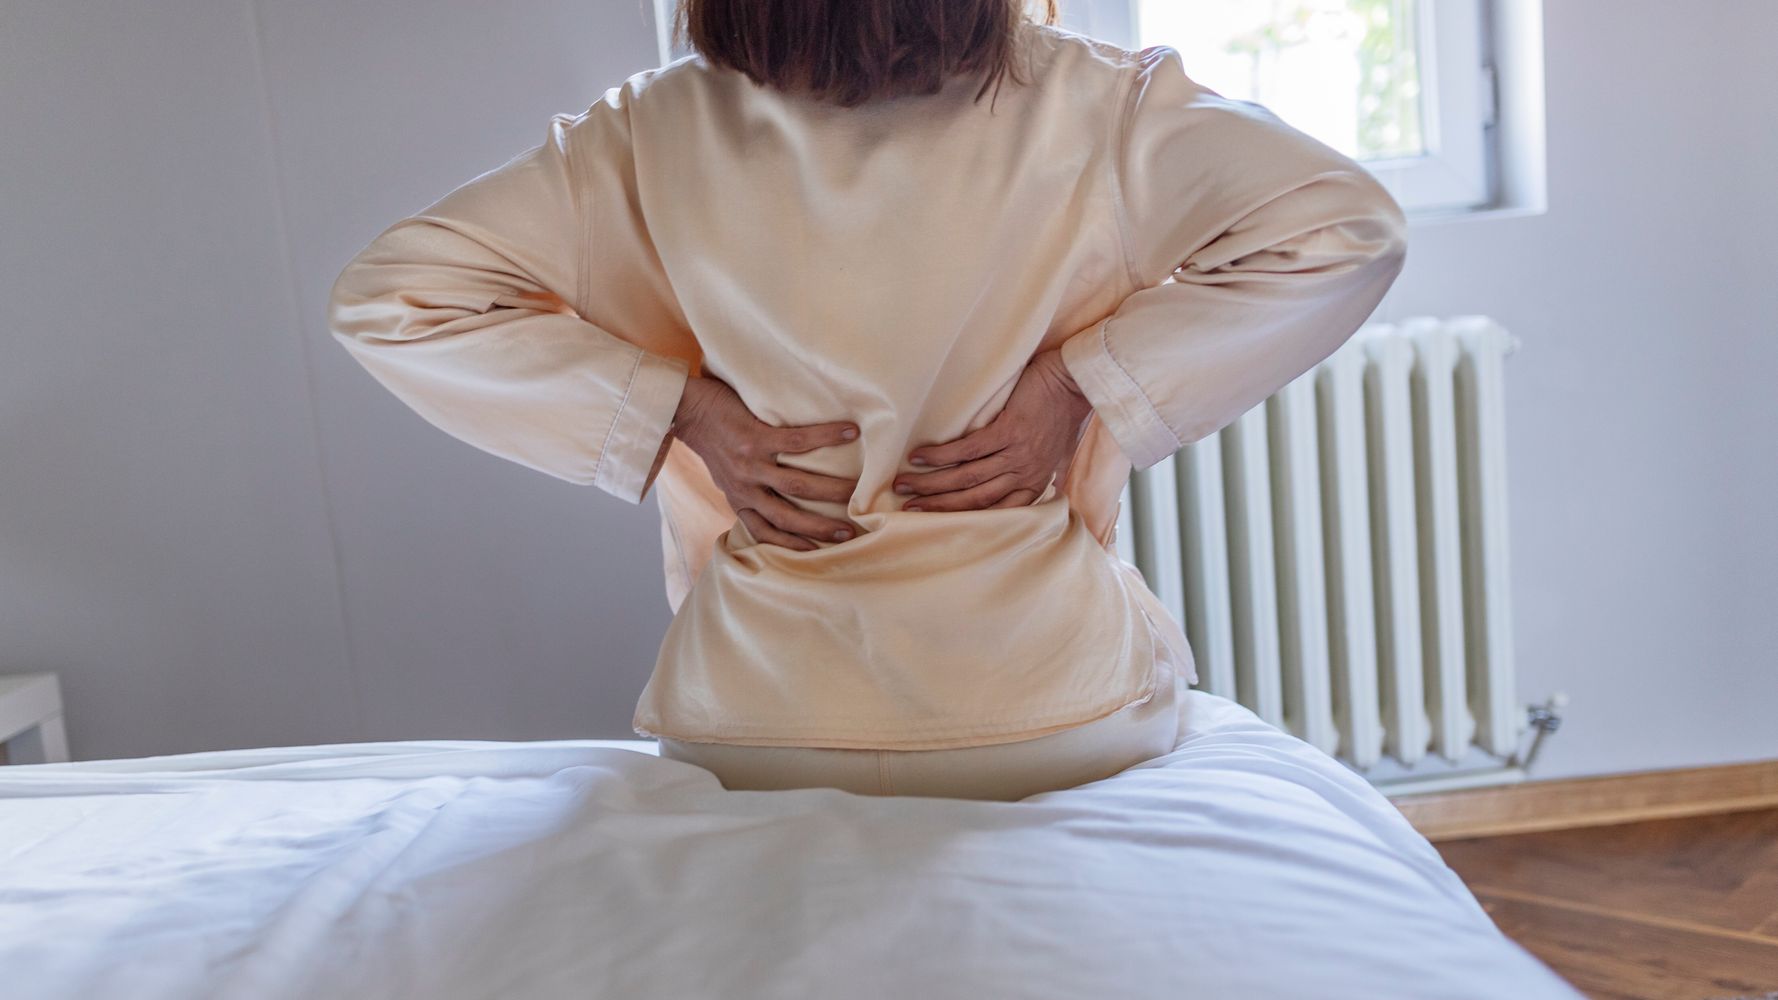 Are Muscle Aches Or Back Pain A Symptom Of The Omicron COVID Variant?